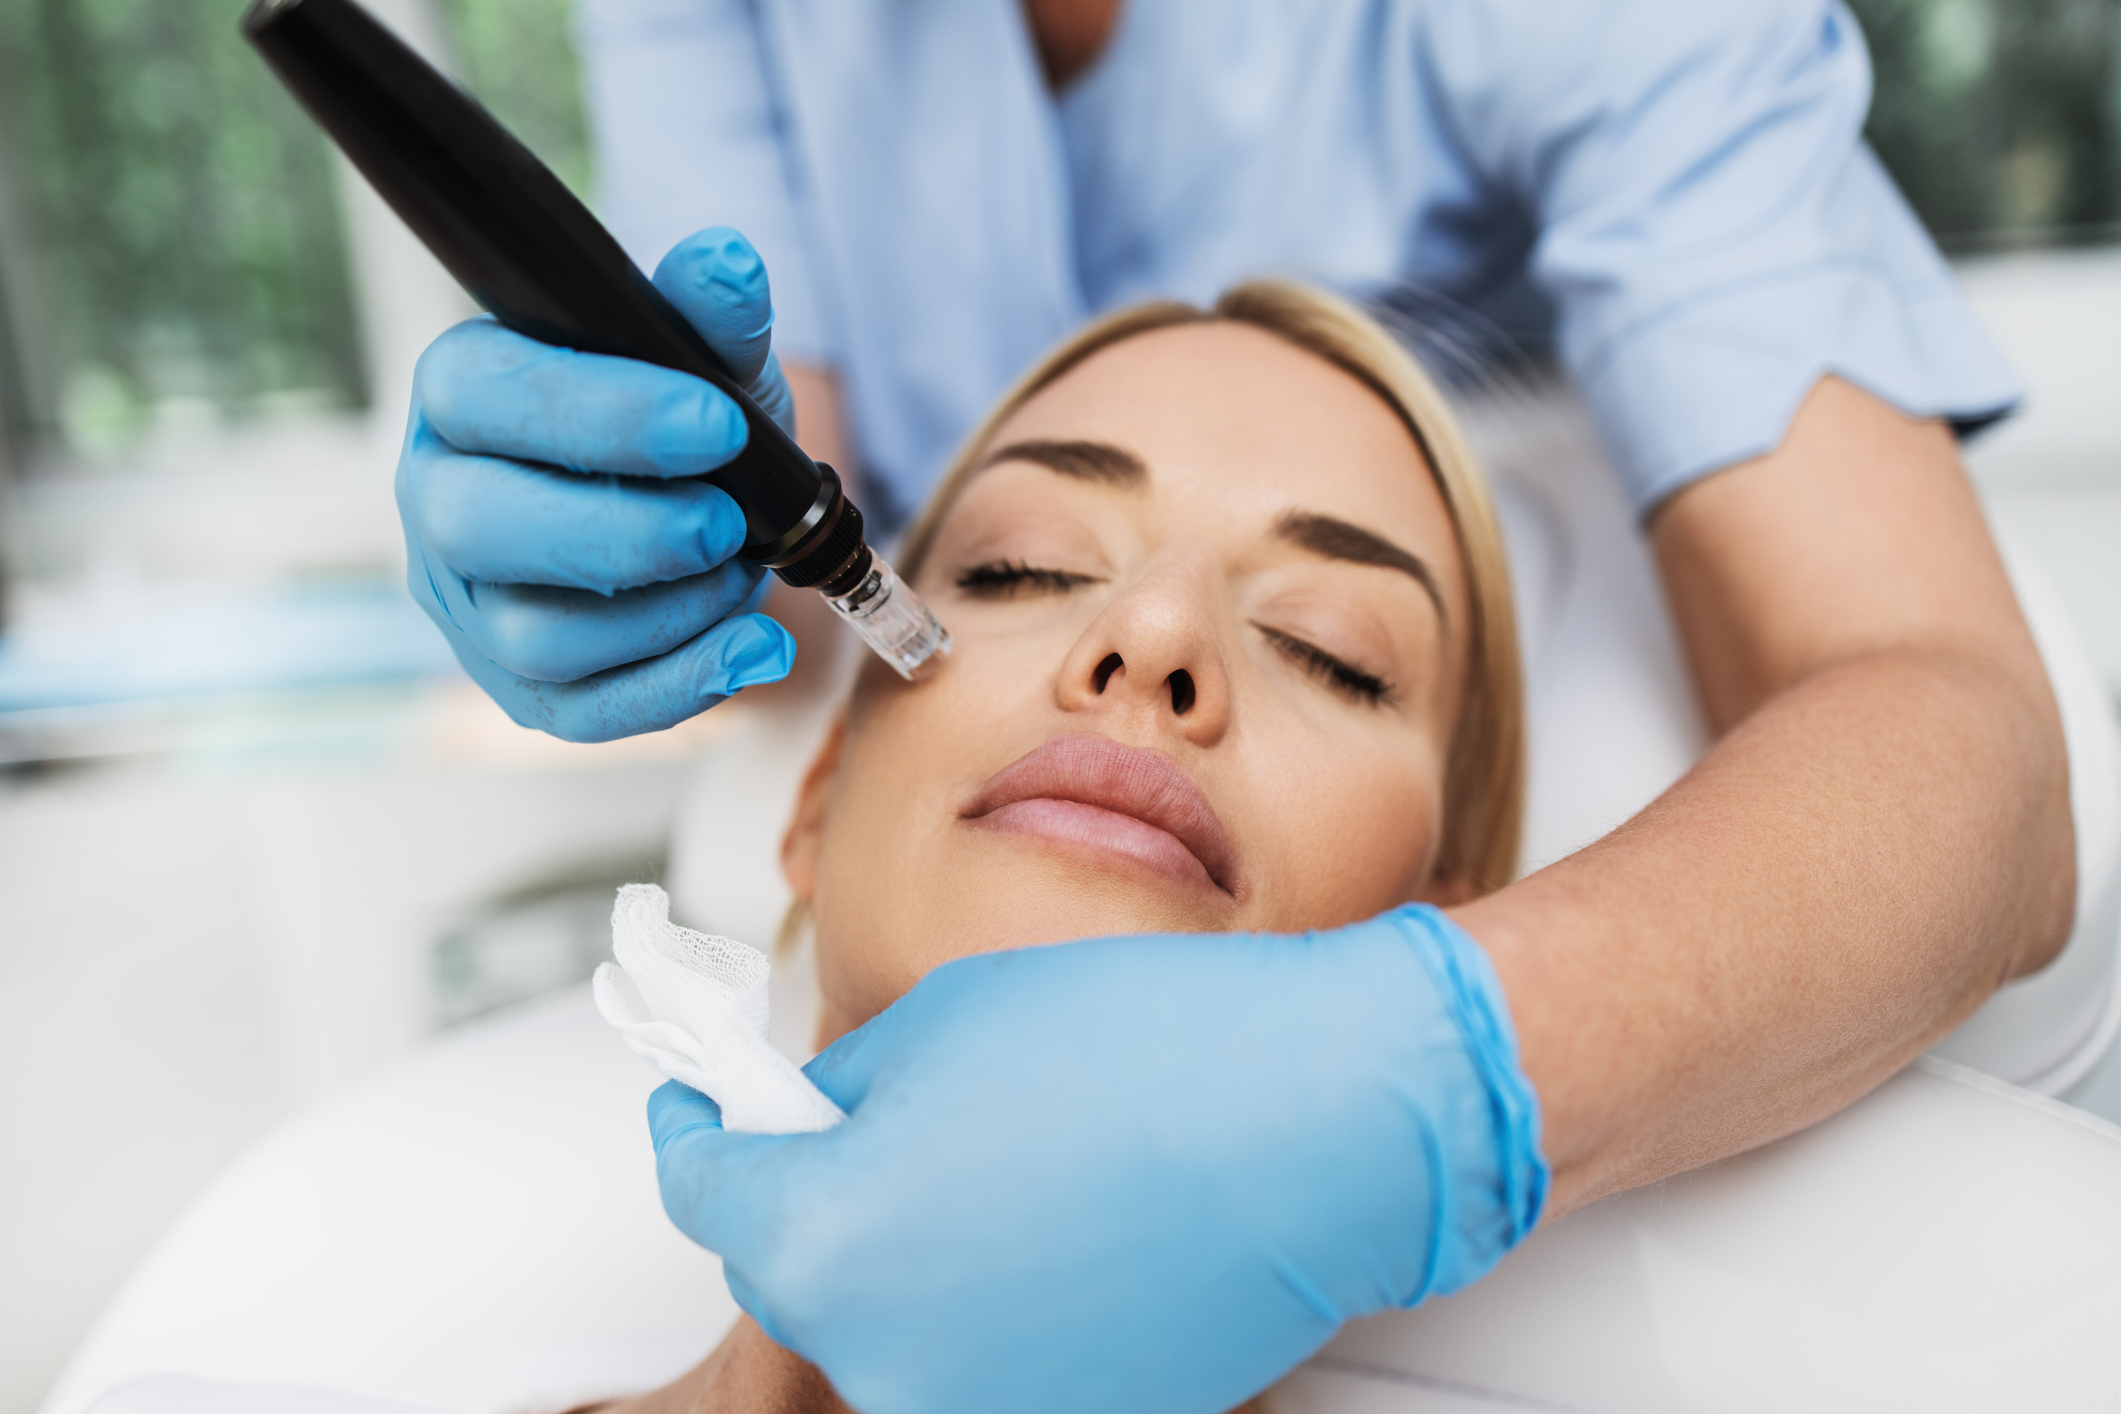 microneedling treatment for acne scars